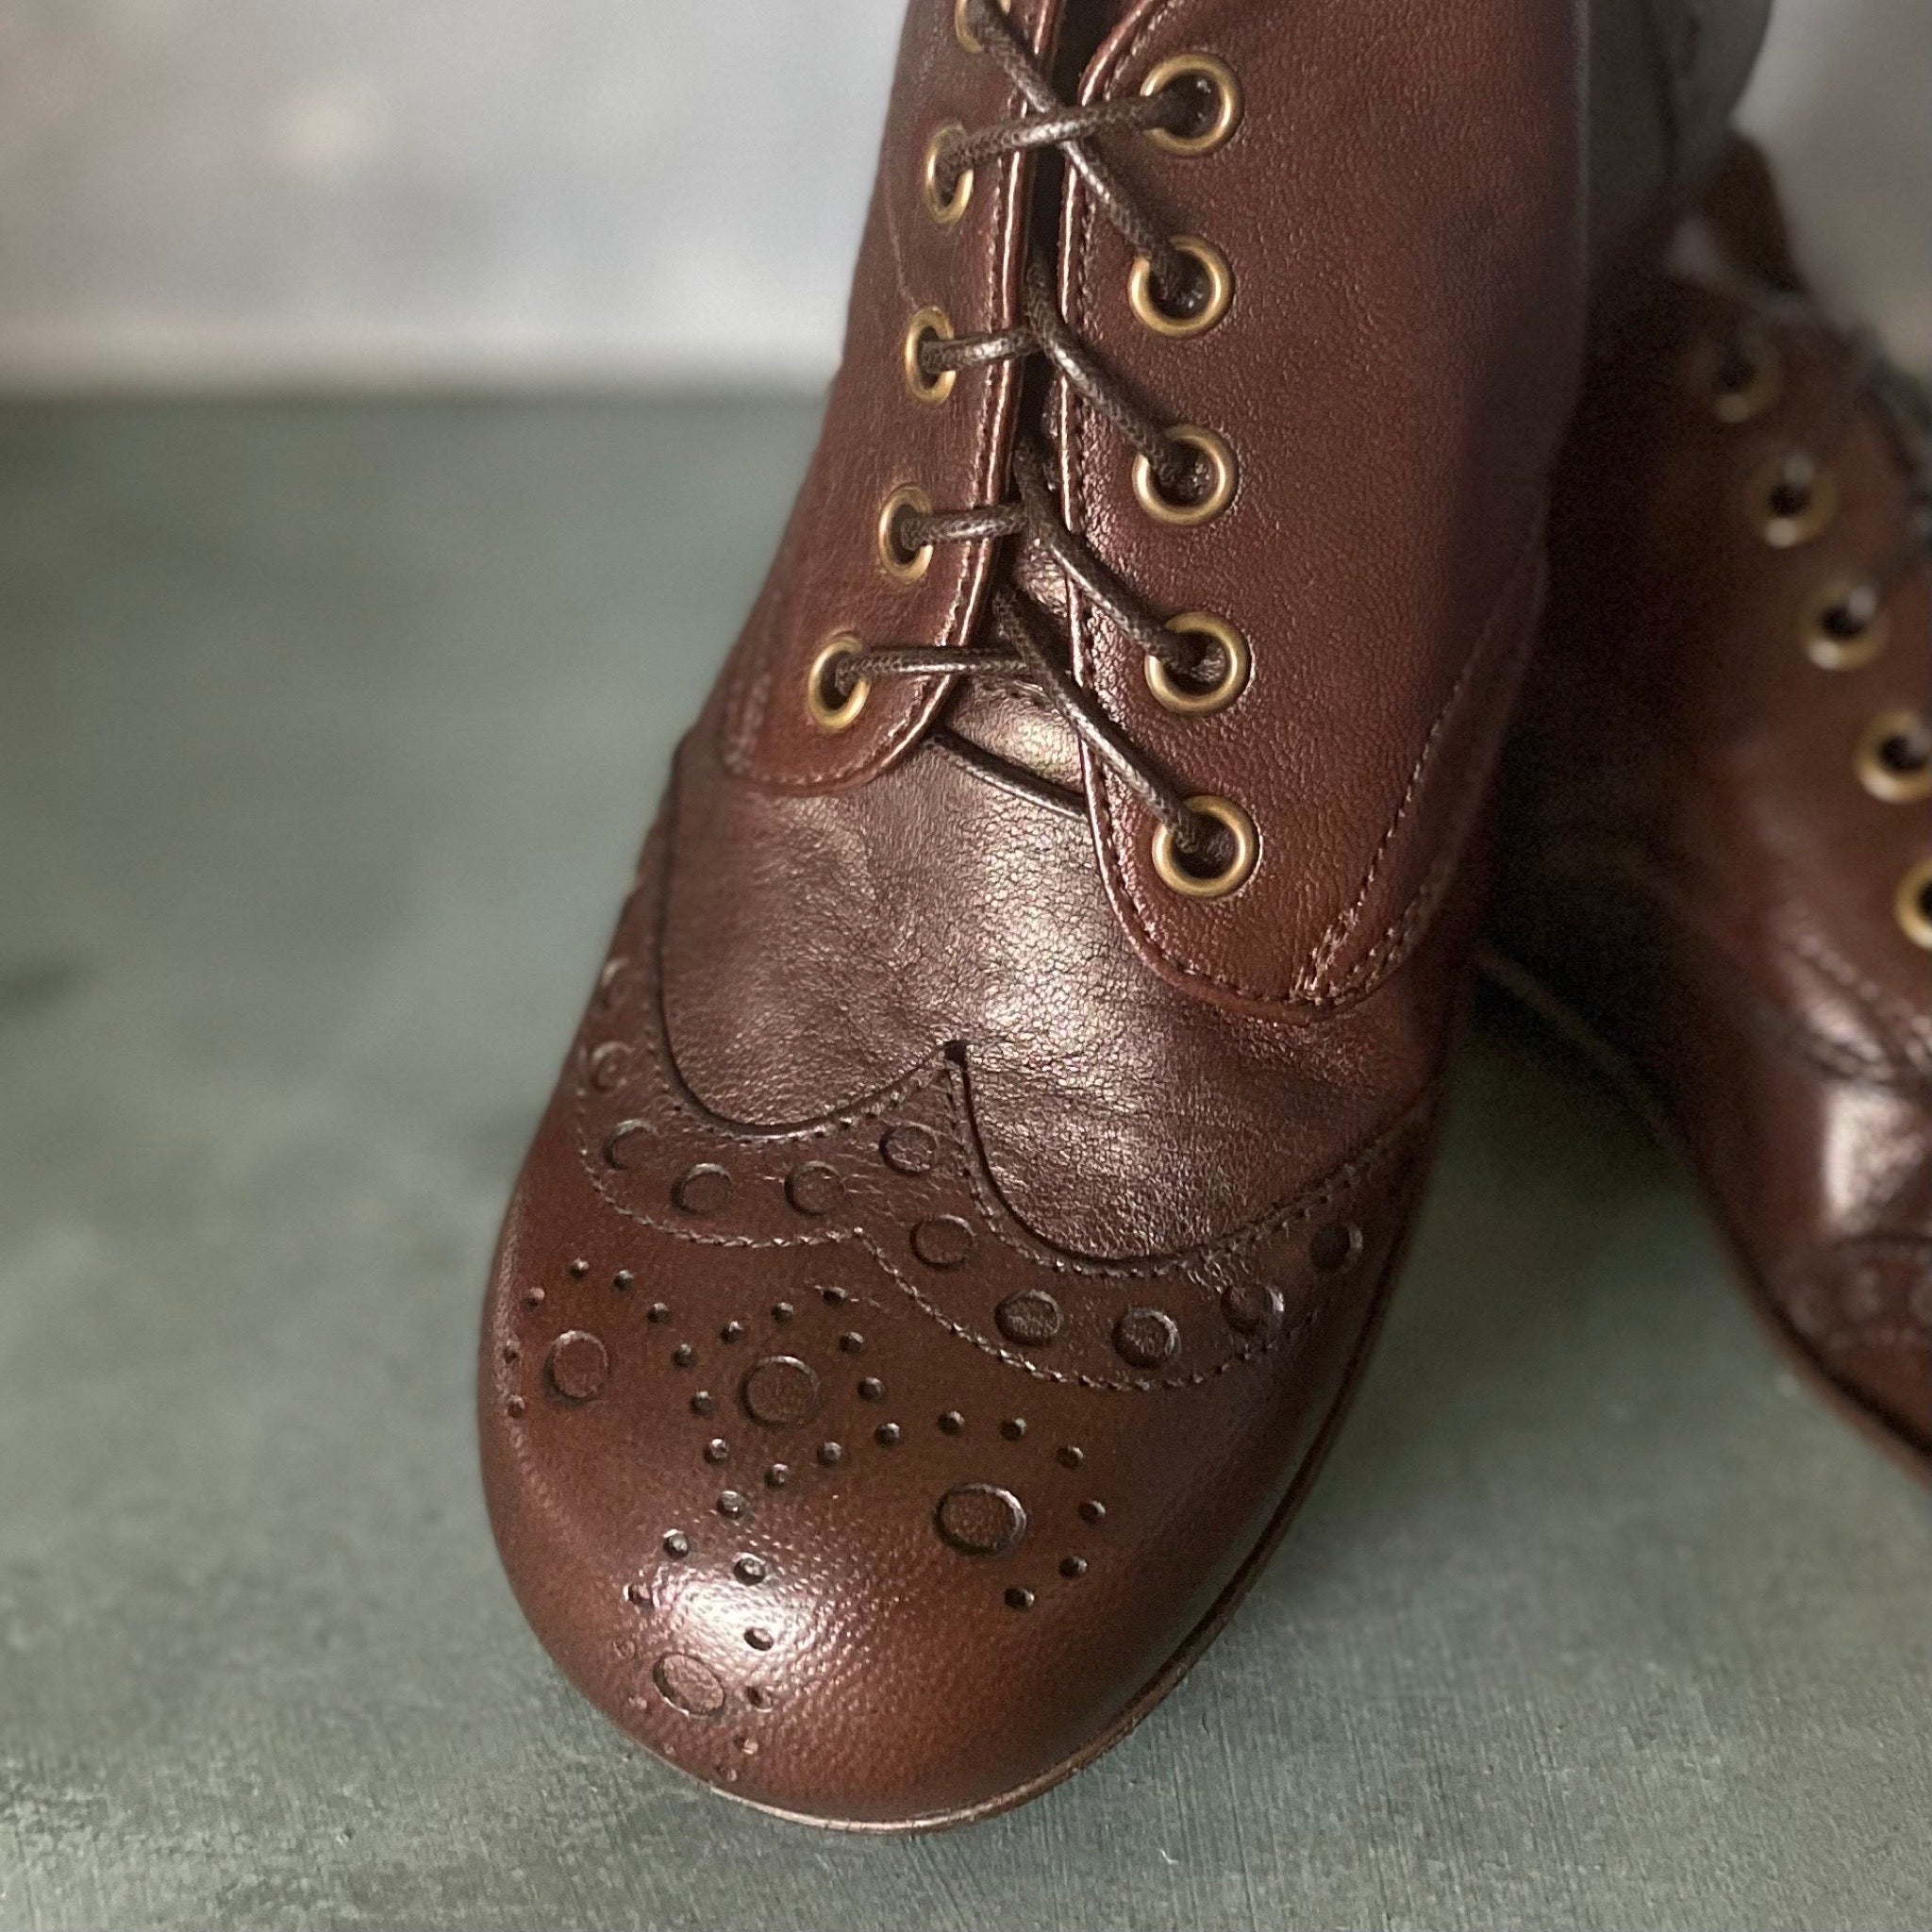 Victoria Varrasso Chocolate Leather Bootlettes